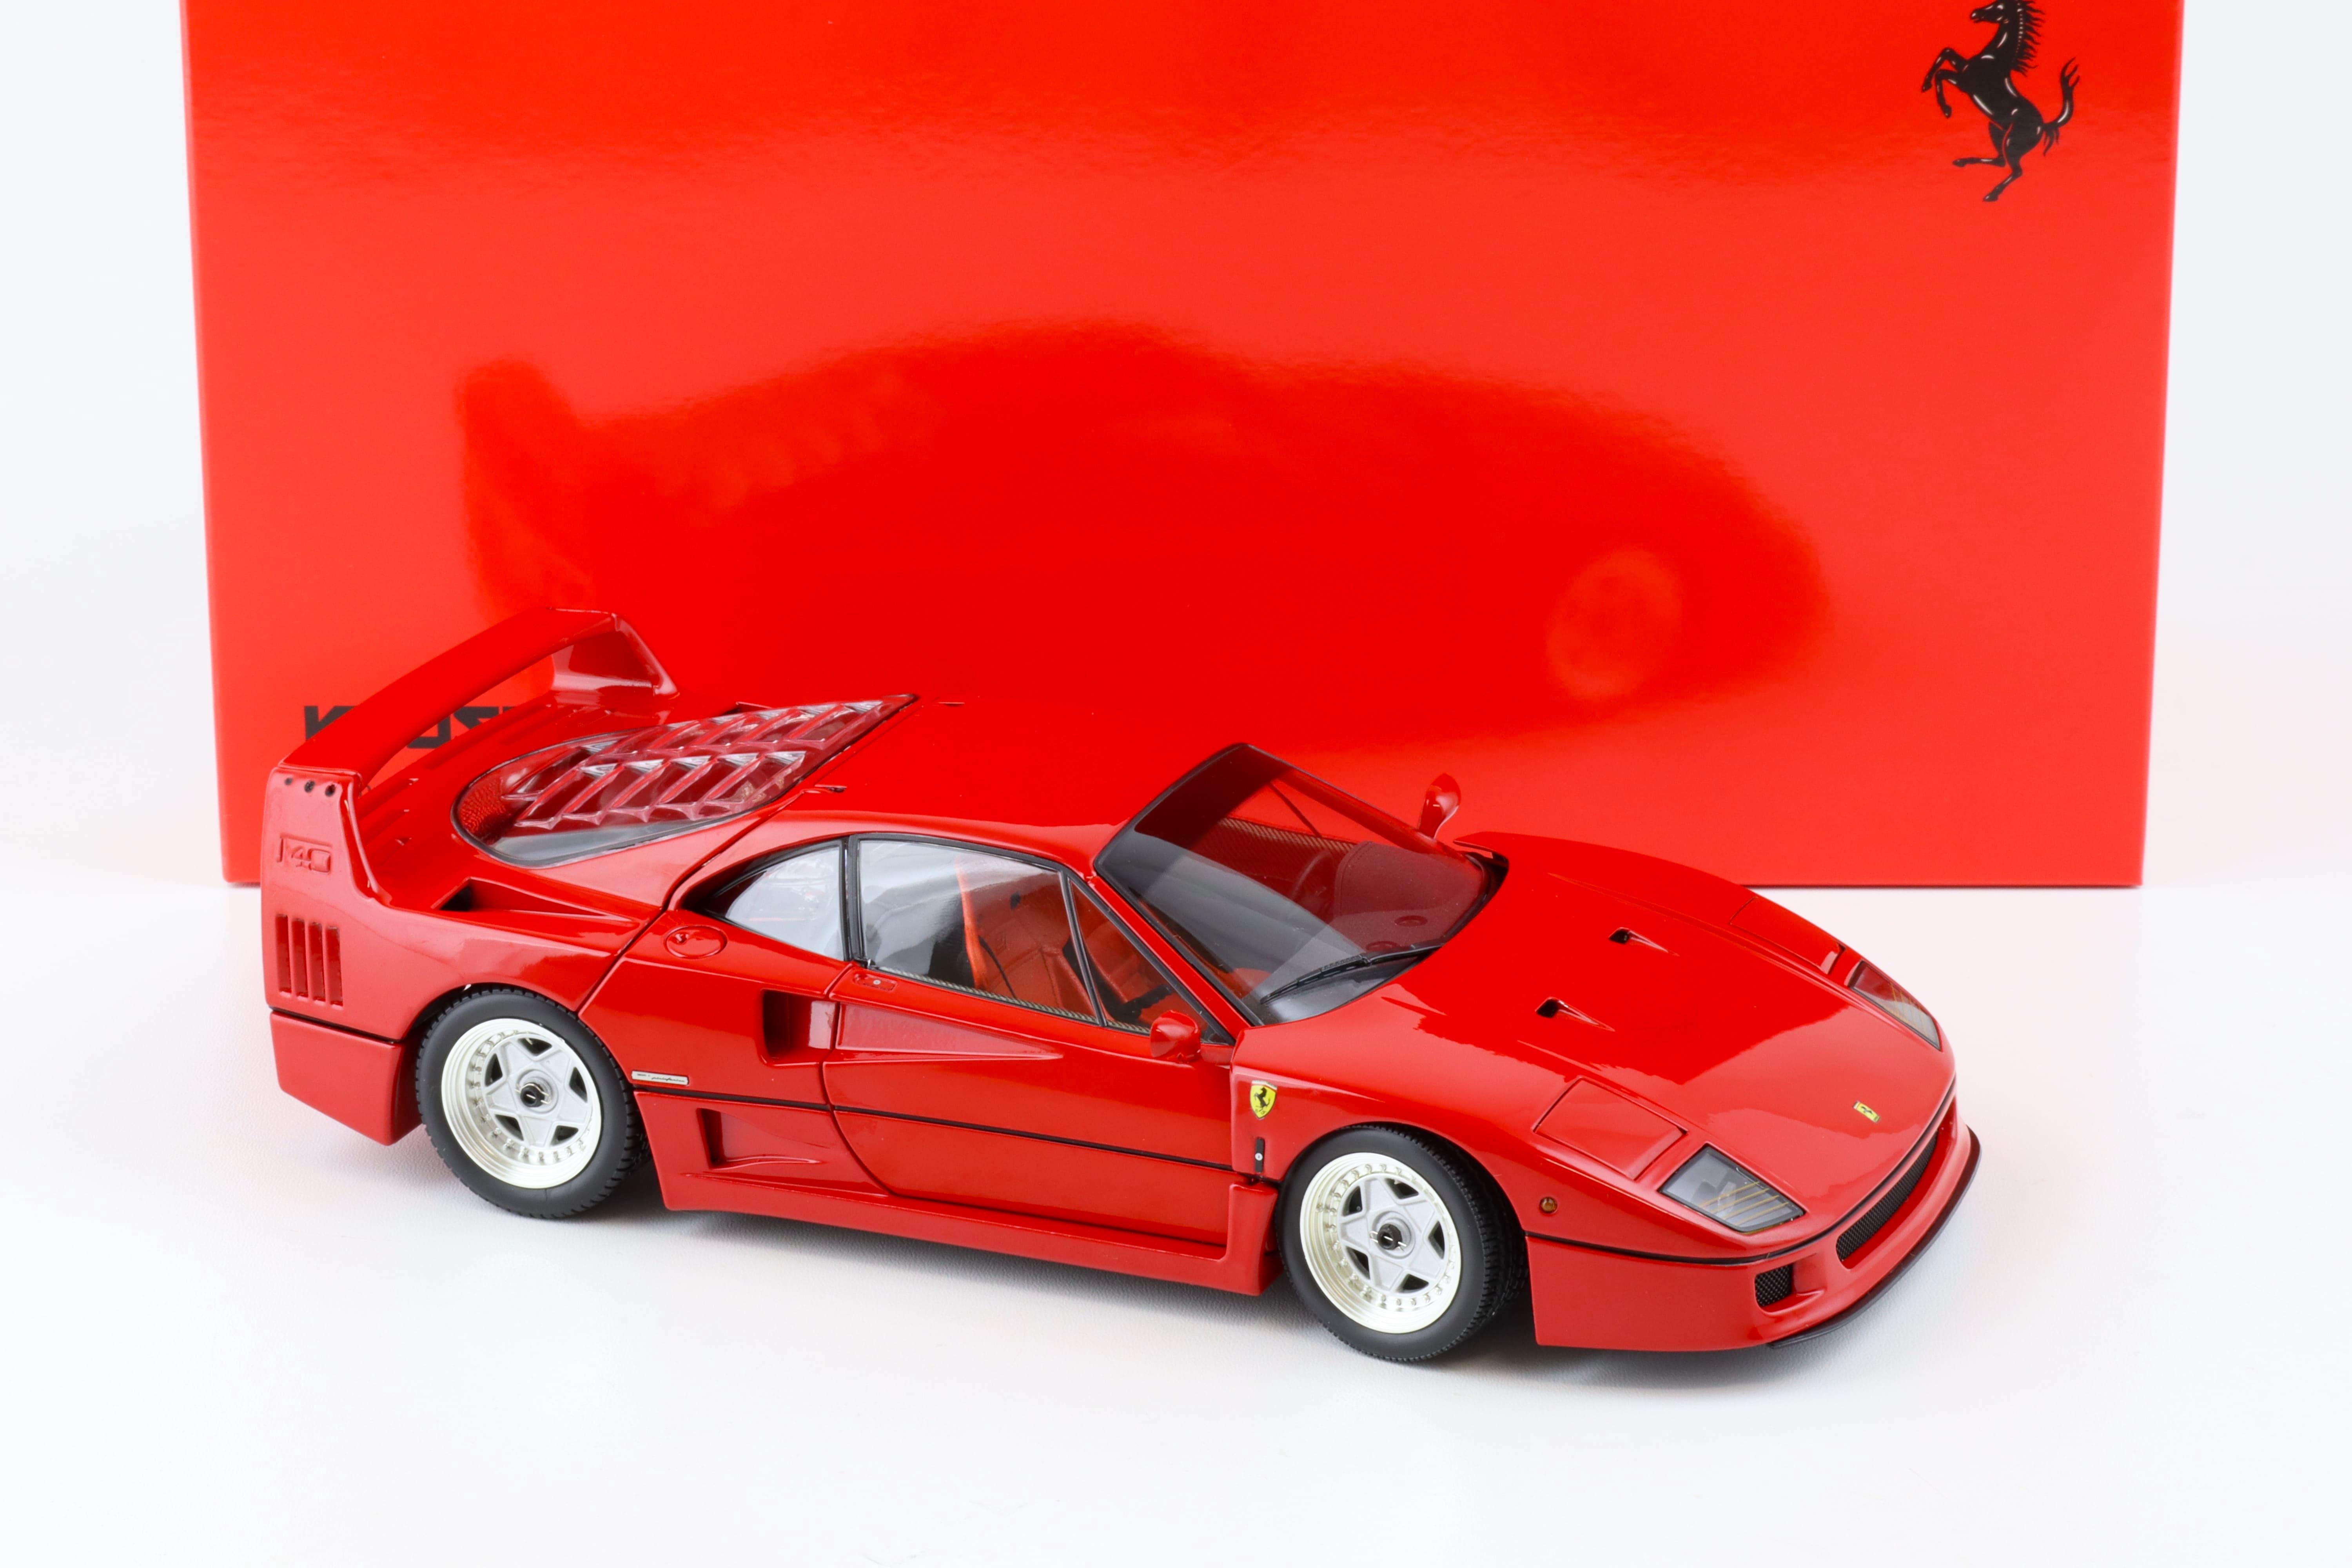 1:18 Kyosho 1987 Ferrari F40 Coupe red 08416R Die-Cast